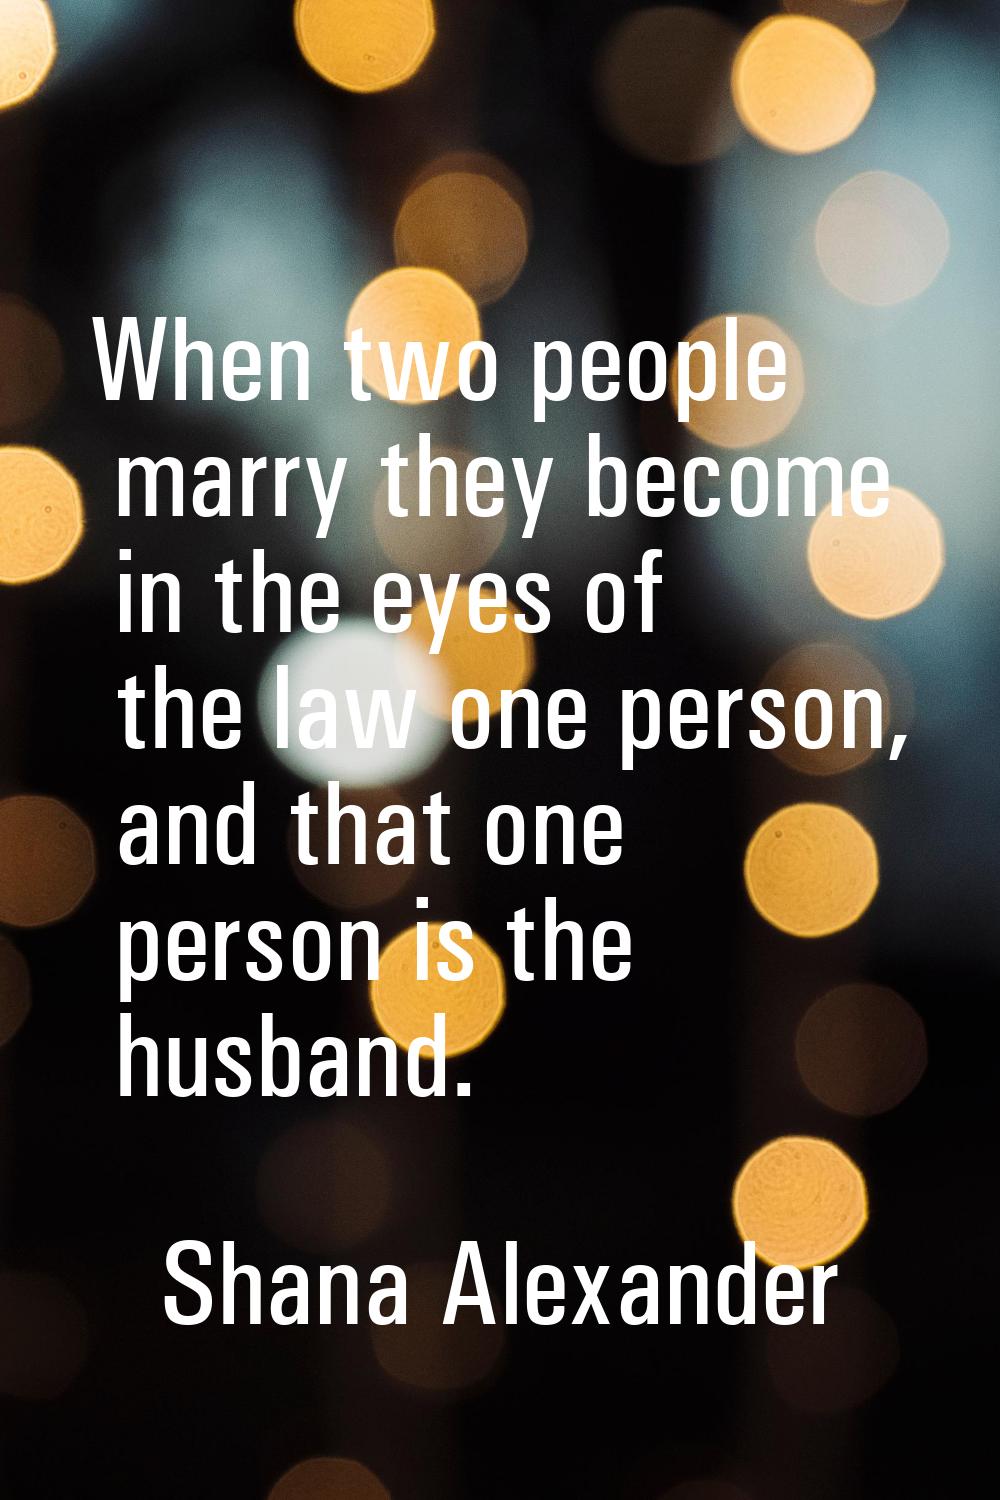 When two people marry they become in the eyes of the law one person, and that one person is the hus